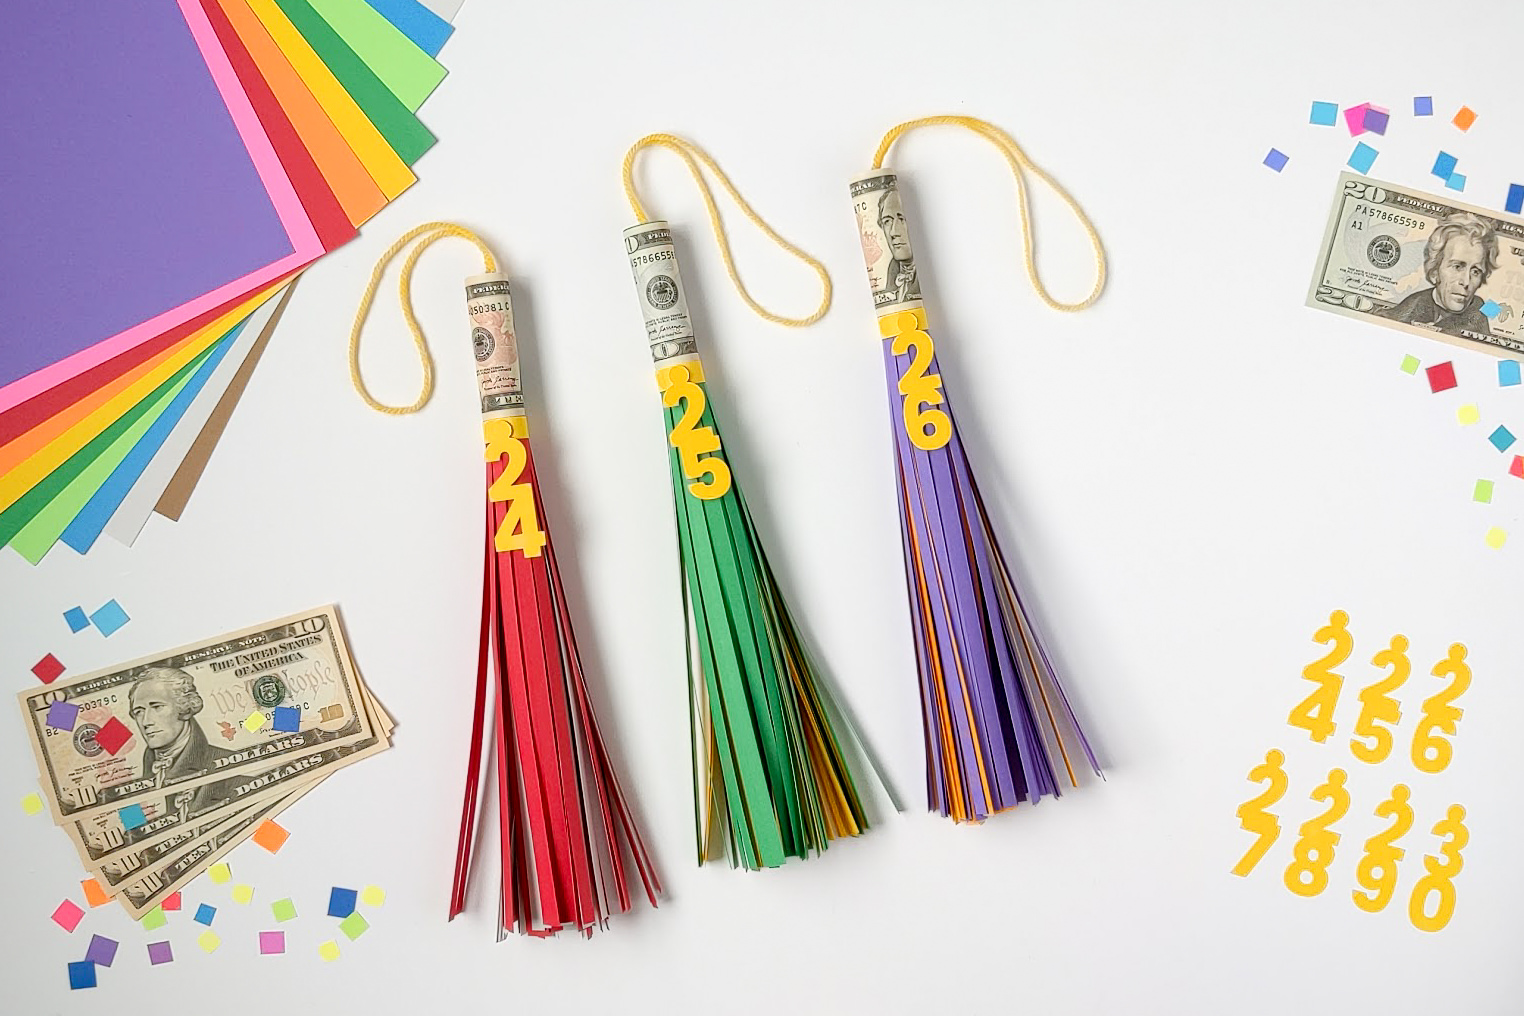 Three big paper graduation tassels with cash rolled inside for a money graduation gift